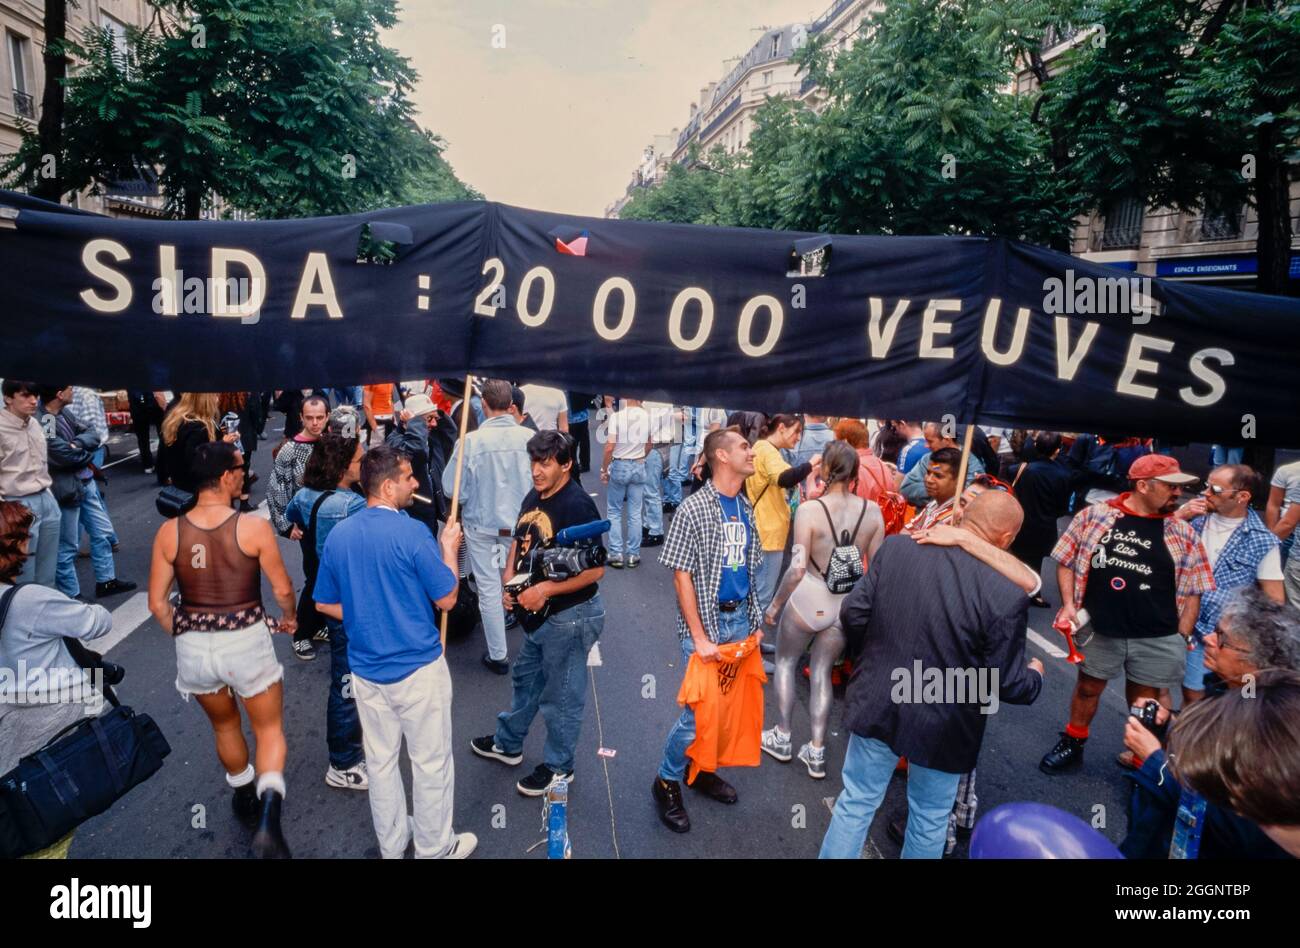 Paris, France, Crowd of People, AIDS Activists of Act Up PAris Demonstrating on Street, 'Gay Pride' 1996 homosexuals young activism, pride march, Protest Banner, 'Aids: 20,000 Widows' Slogan Stock Photo